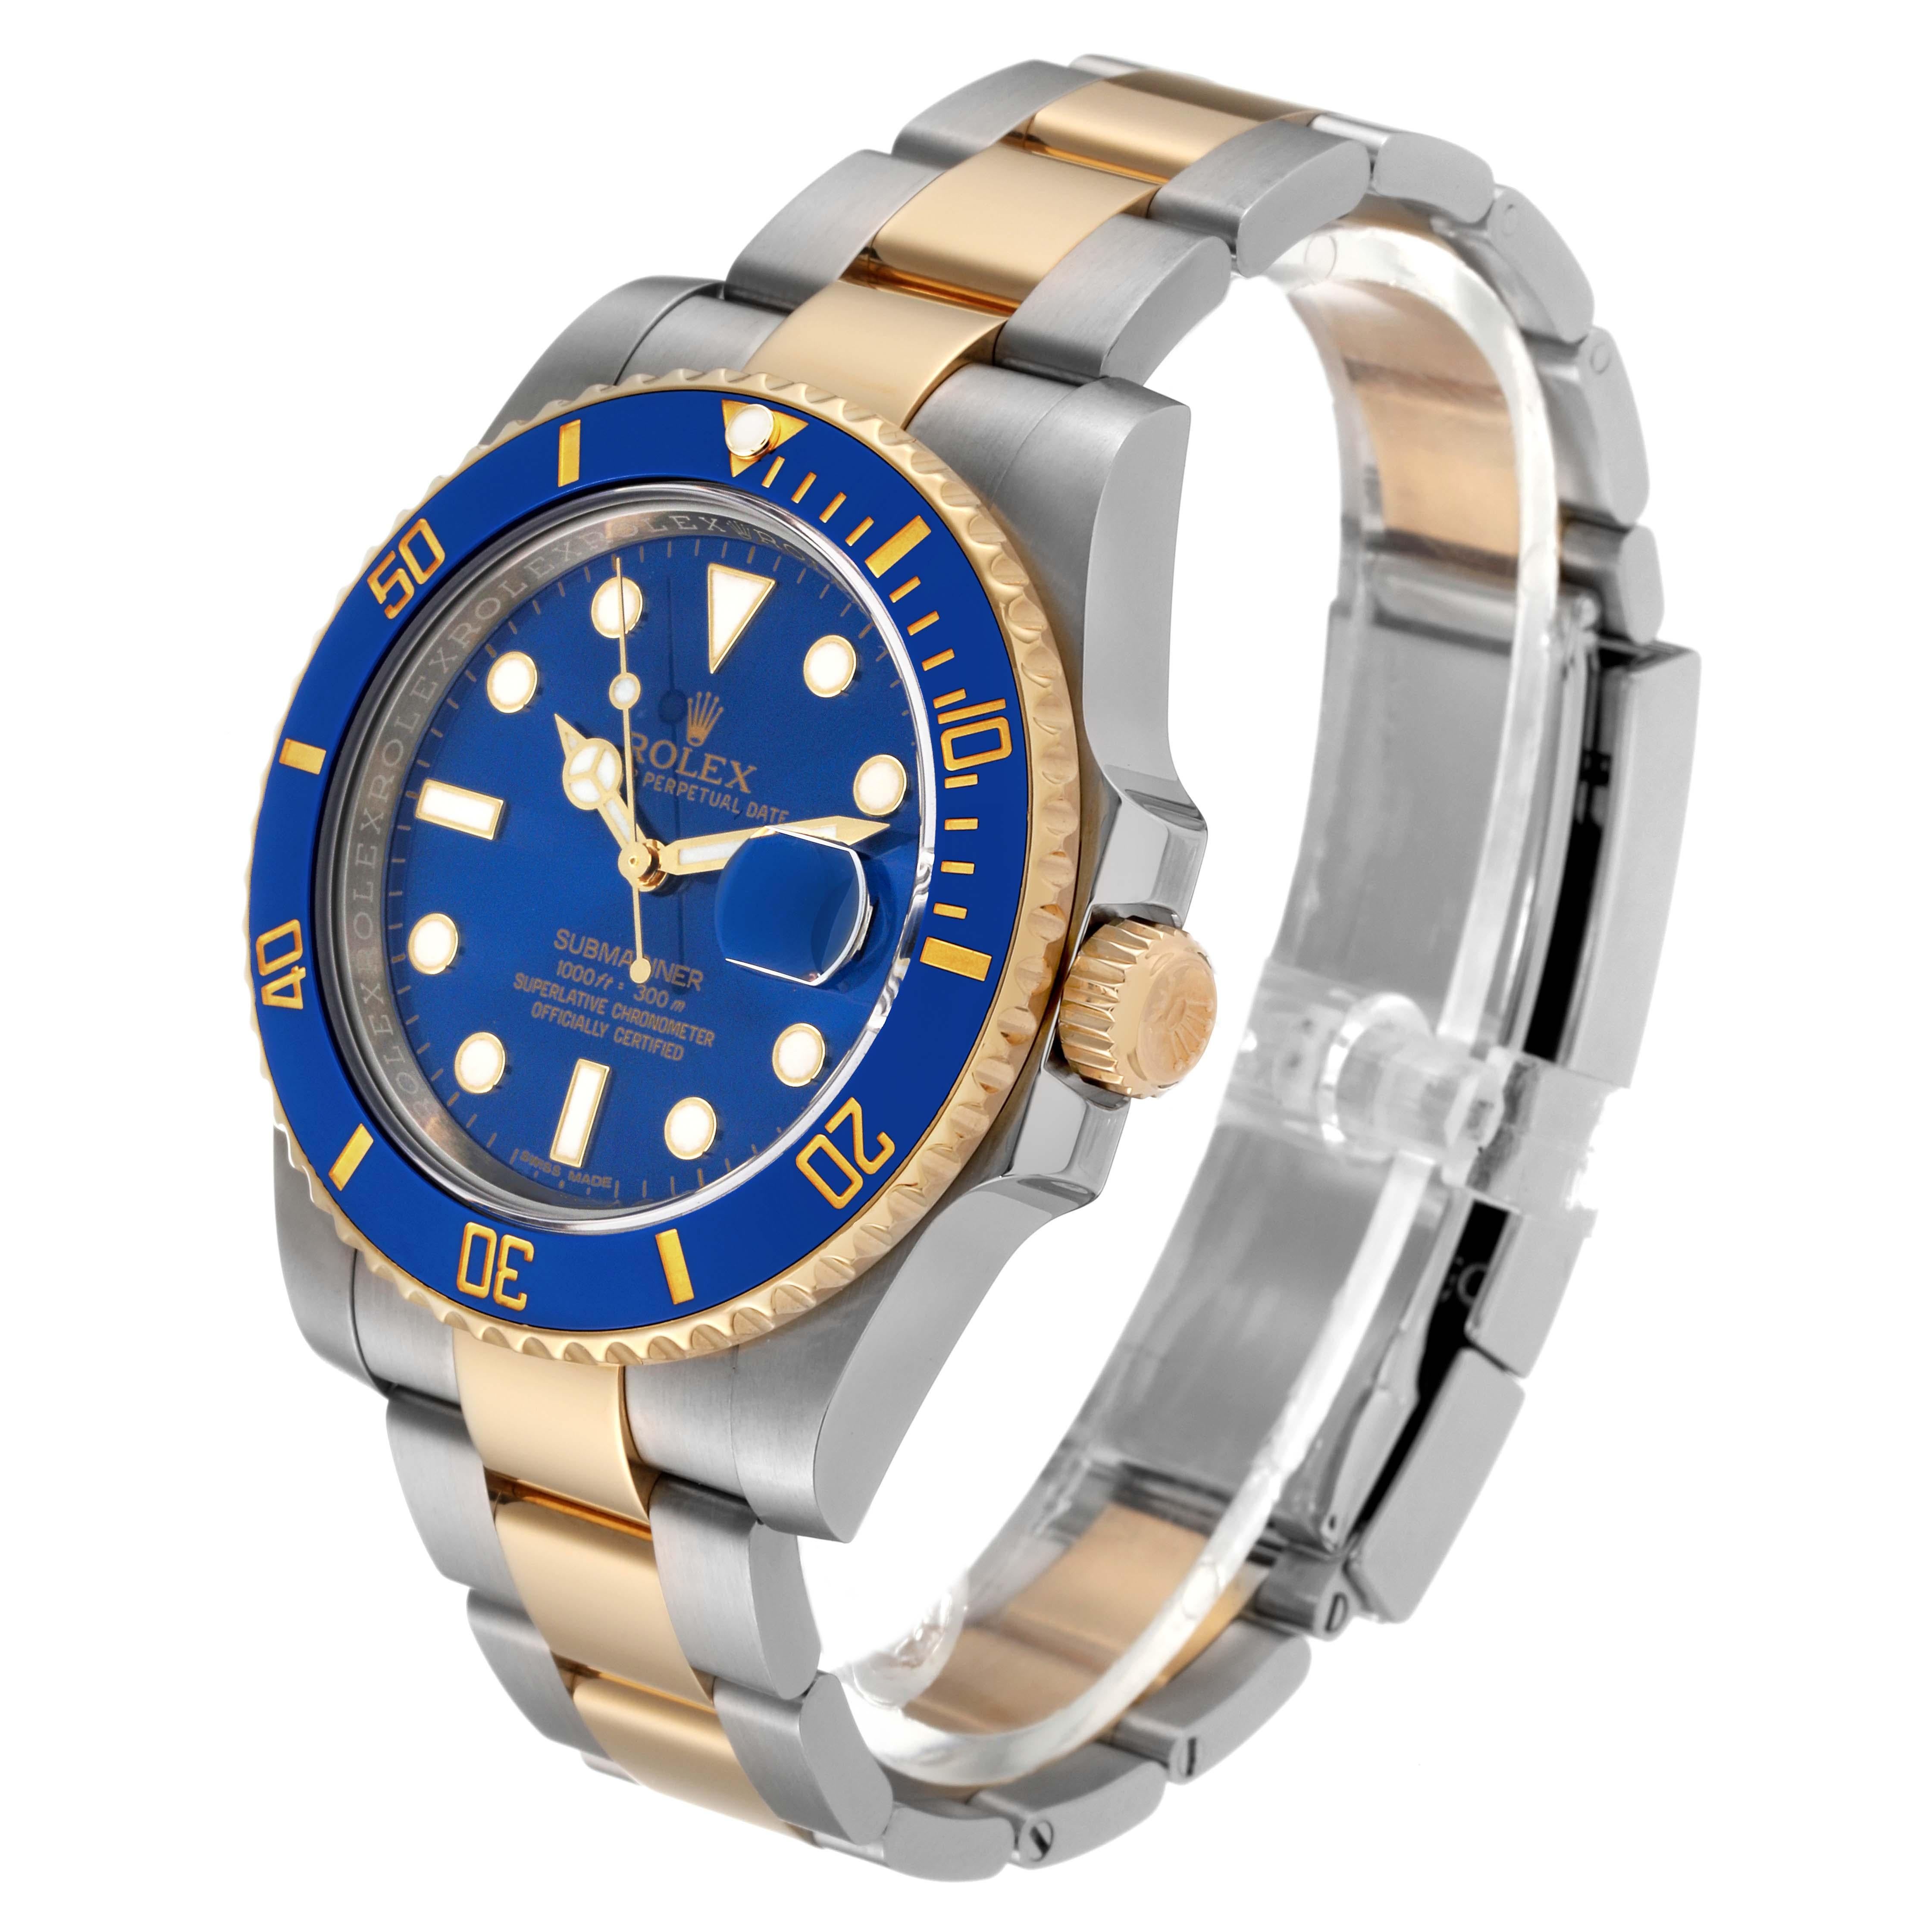 Rolex Submariner Steel Yellow Gold Blue Dial Mens Watch 116613 Box Card For Sale 5